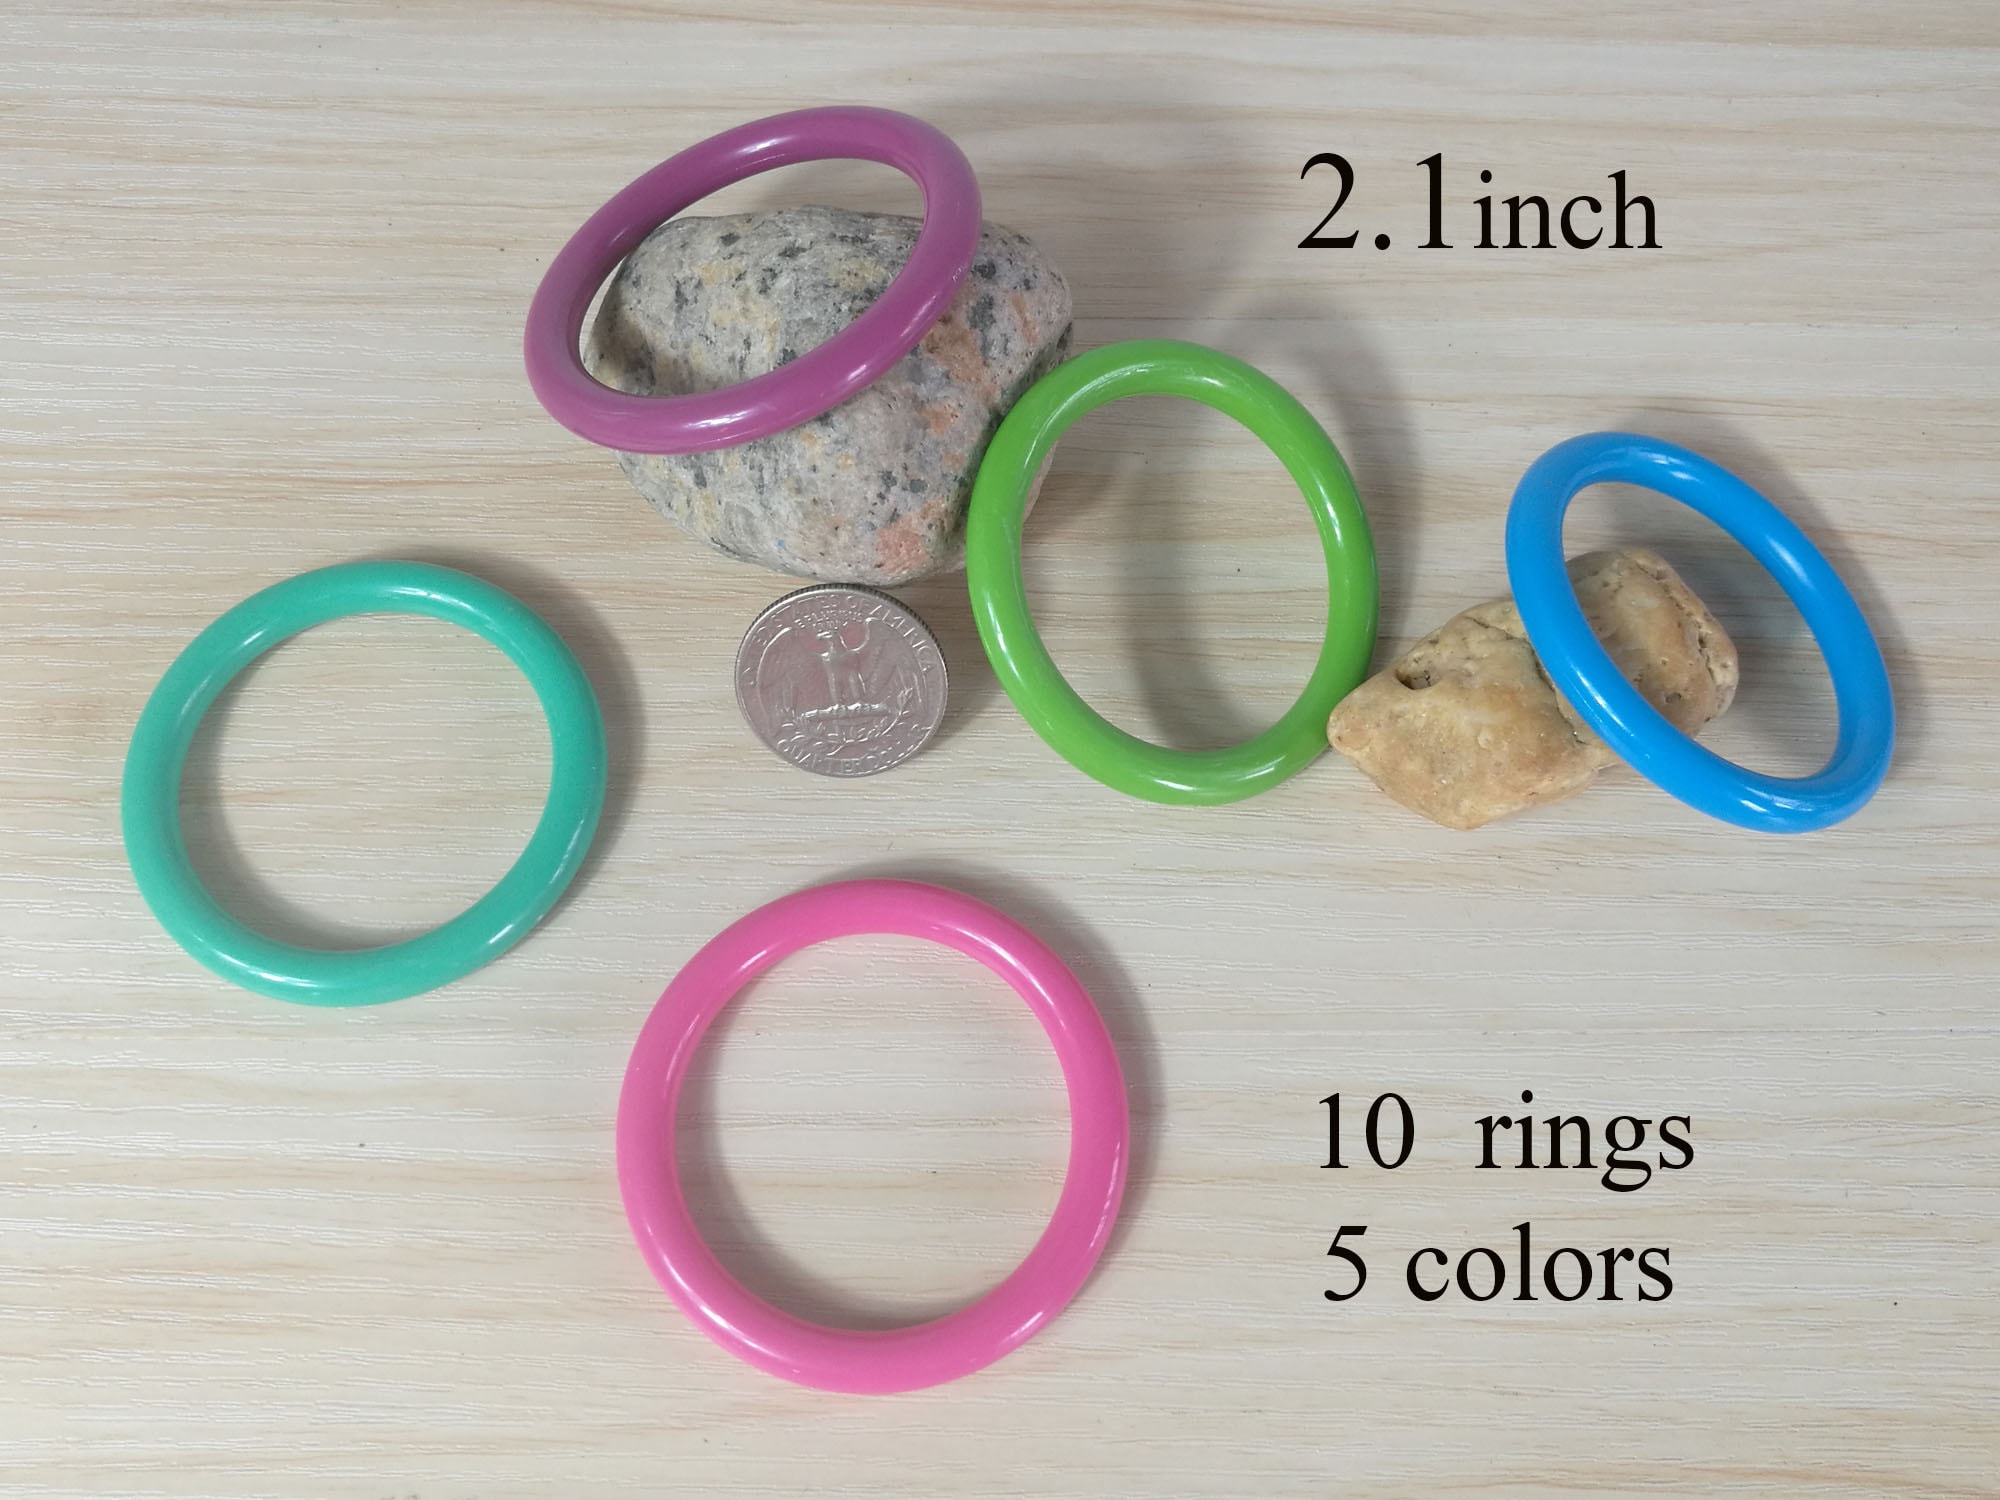 Lot of 10 Vtg Marbella Round Plastic Rings Macrame Crafts Assorted Colors  Sizes